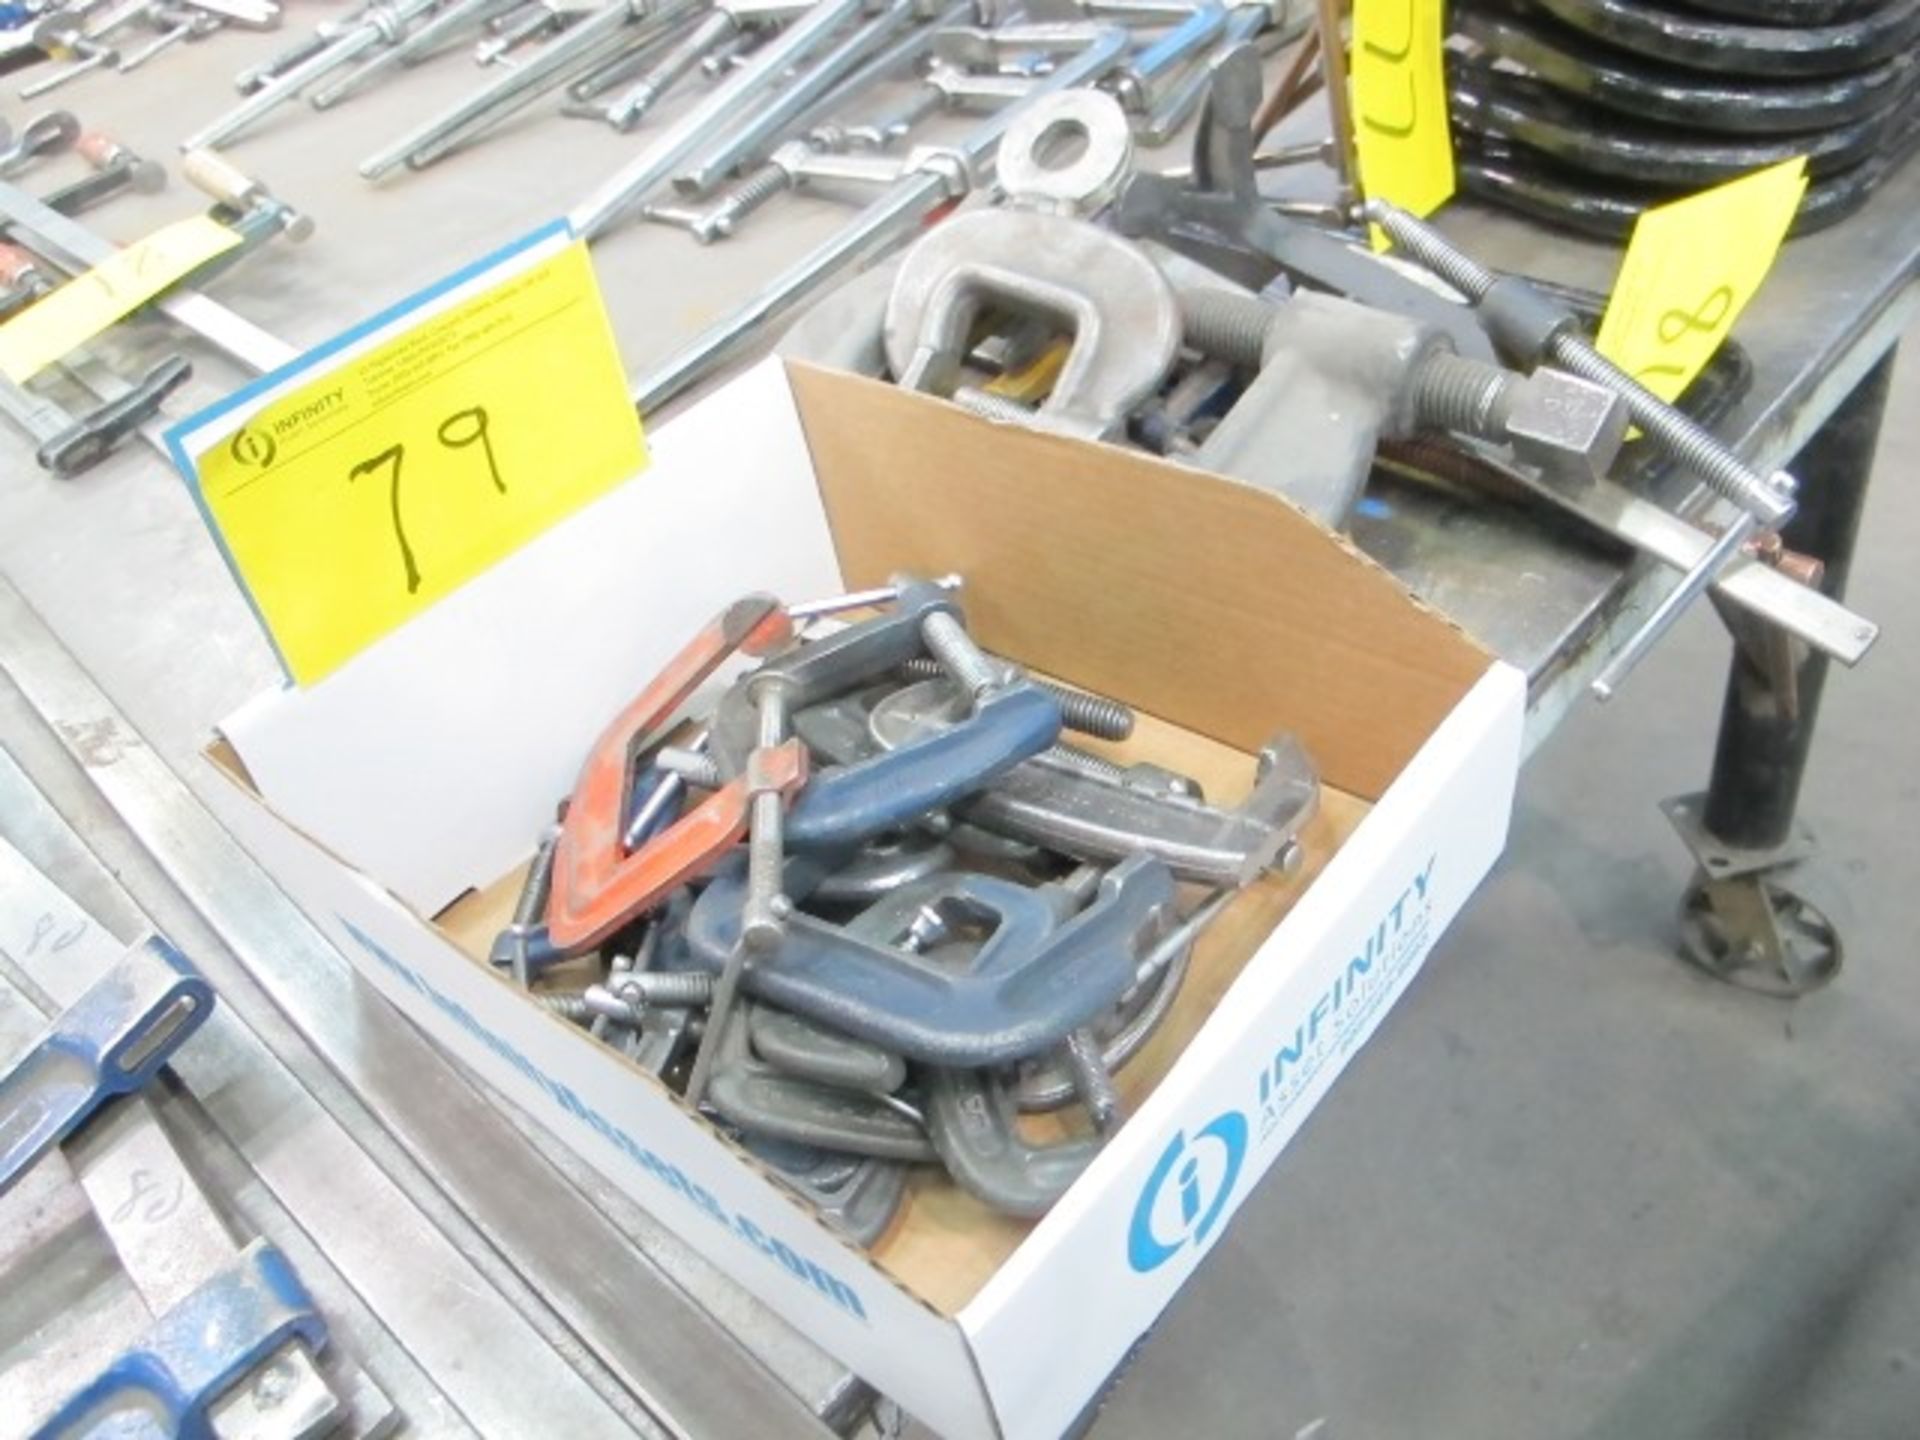 QUANTITY OF SMALL "C" CLAMPS